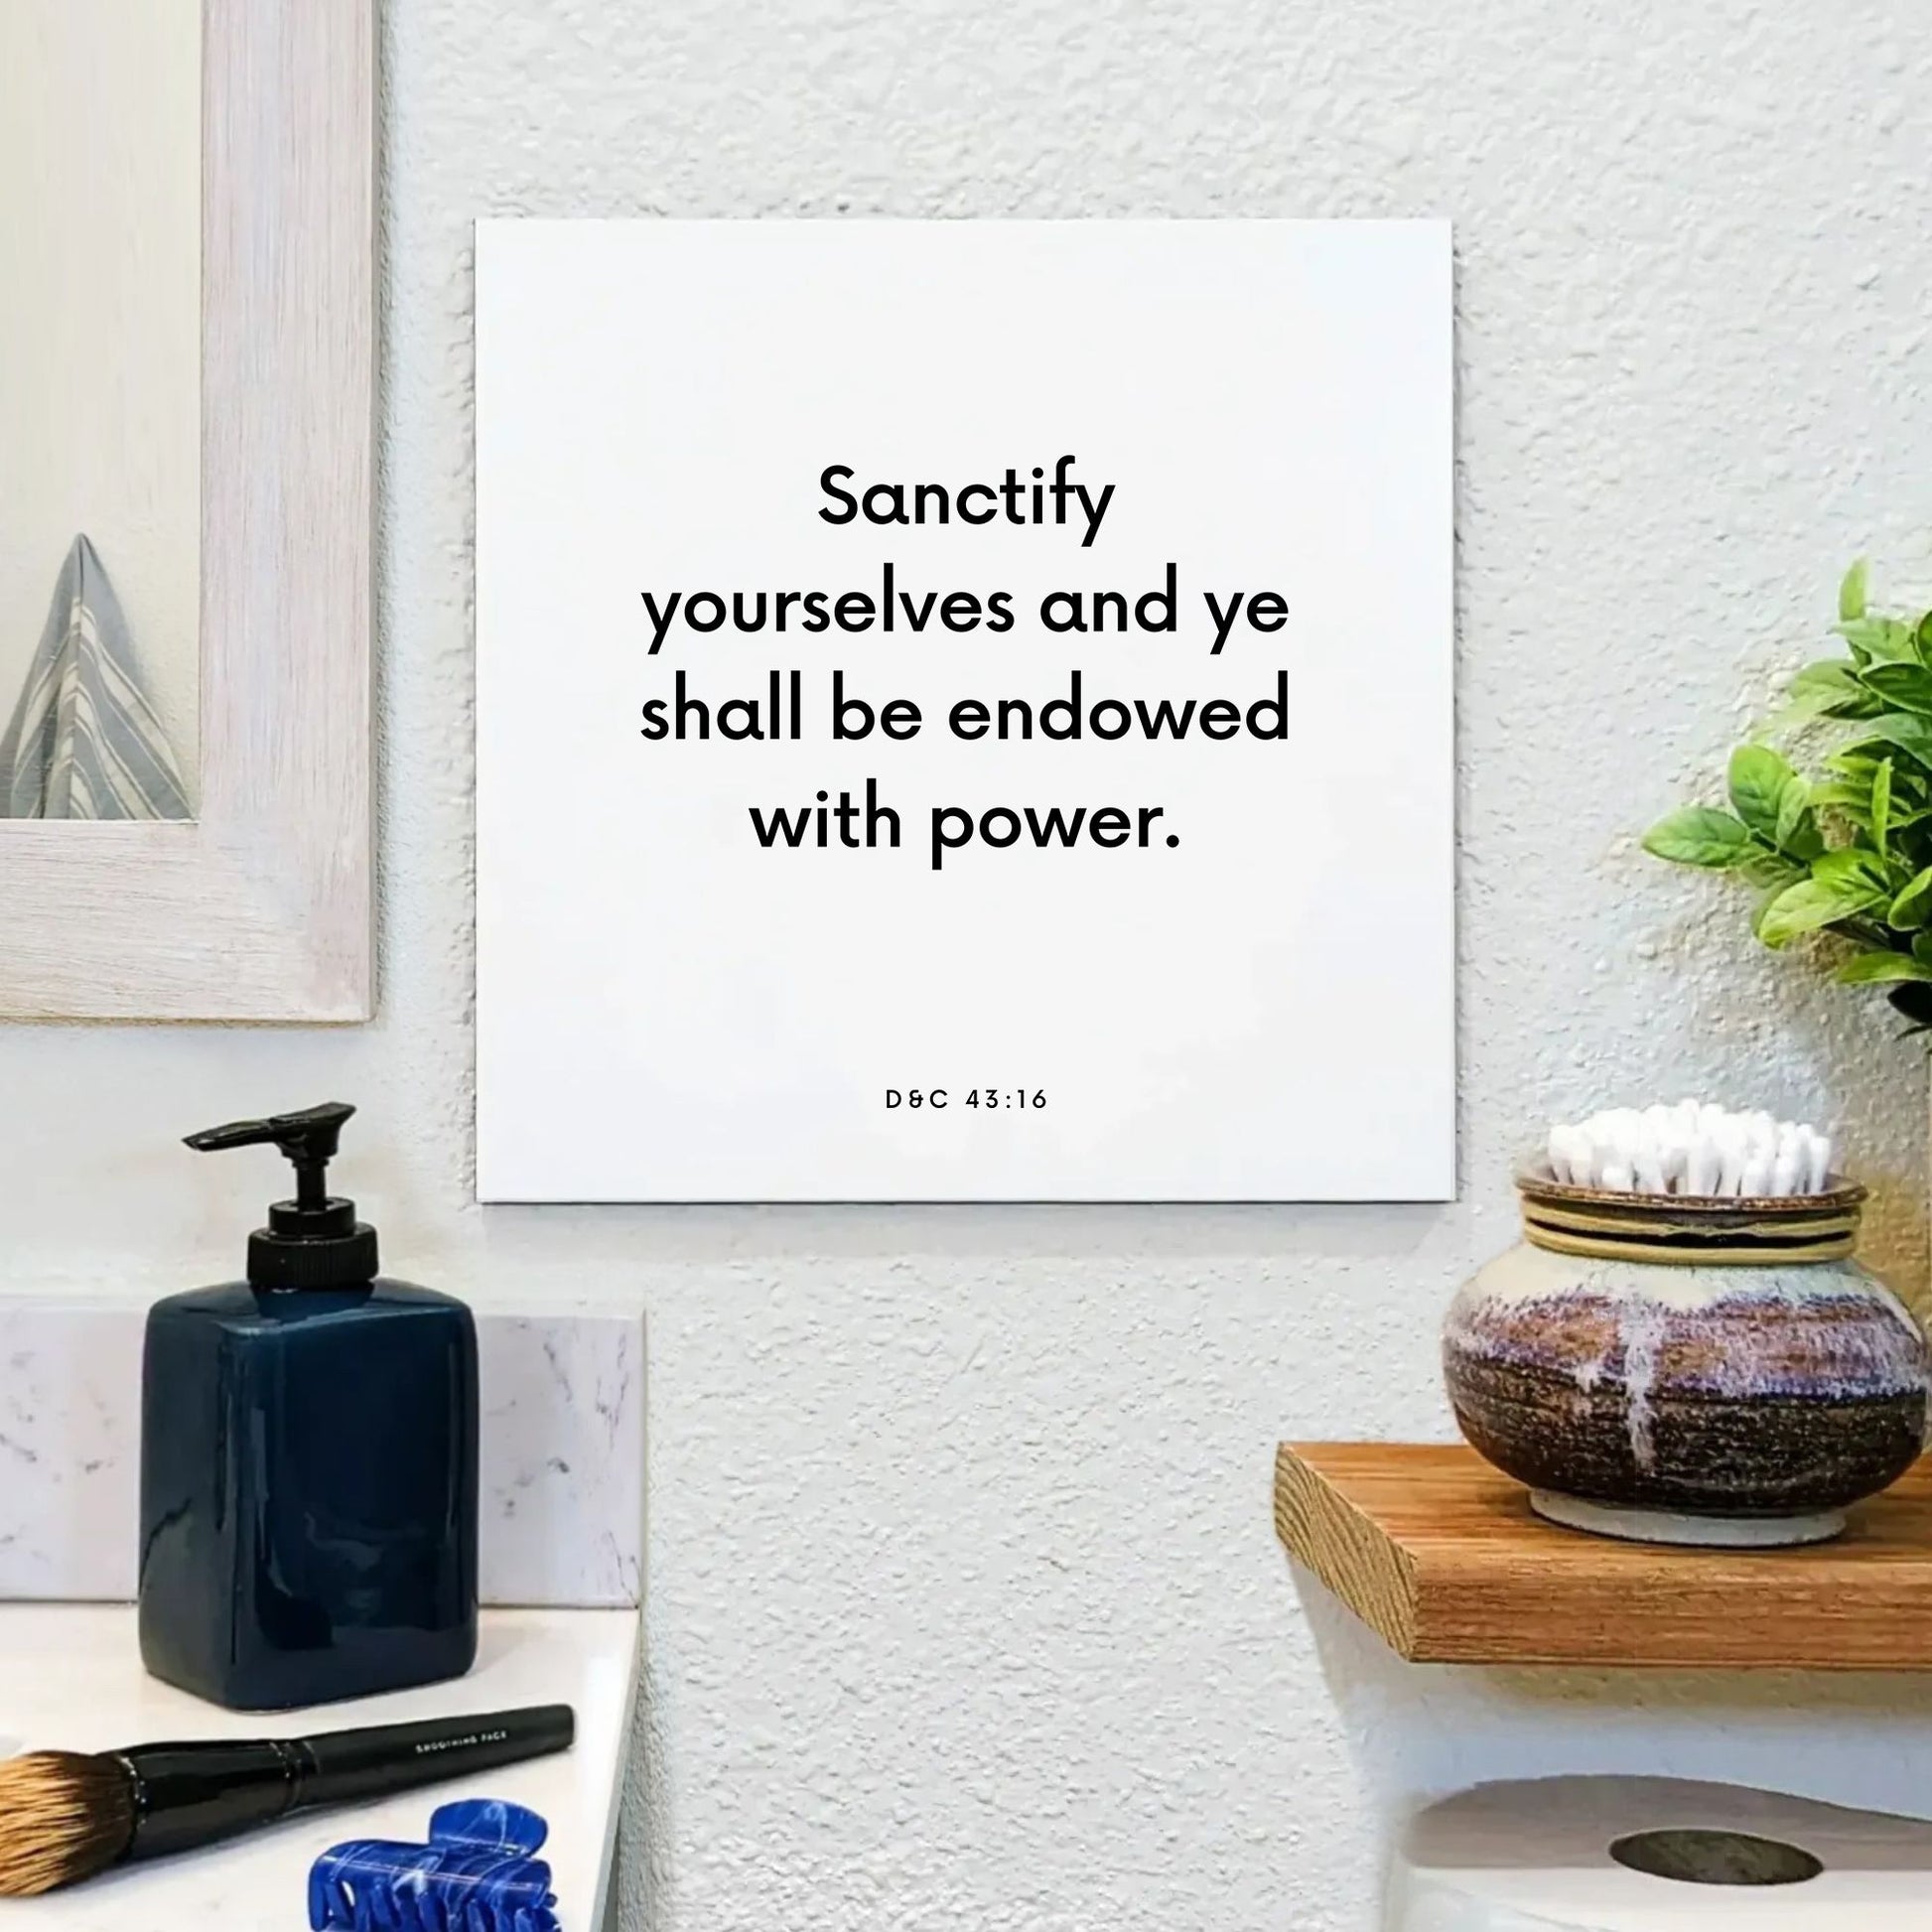 Bathroom mouting of the scripture tile for D&C 43:16 - "Sanctify yourselves and ye shall be endowed with power"